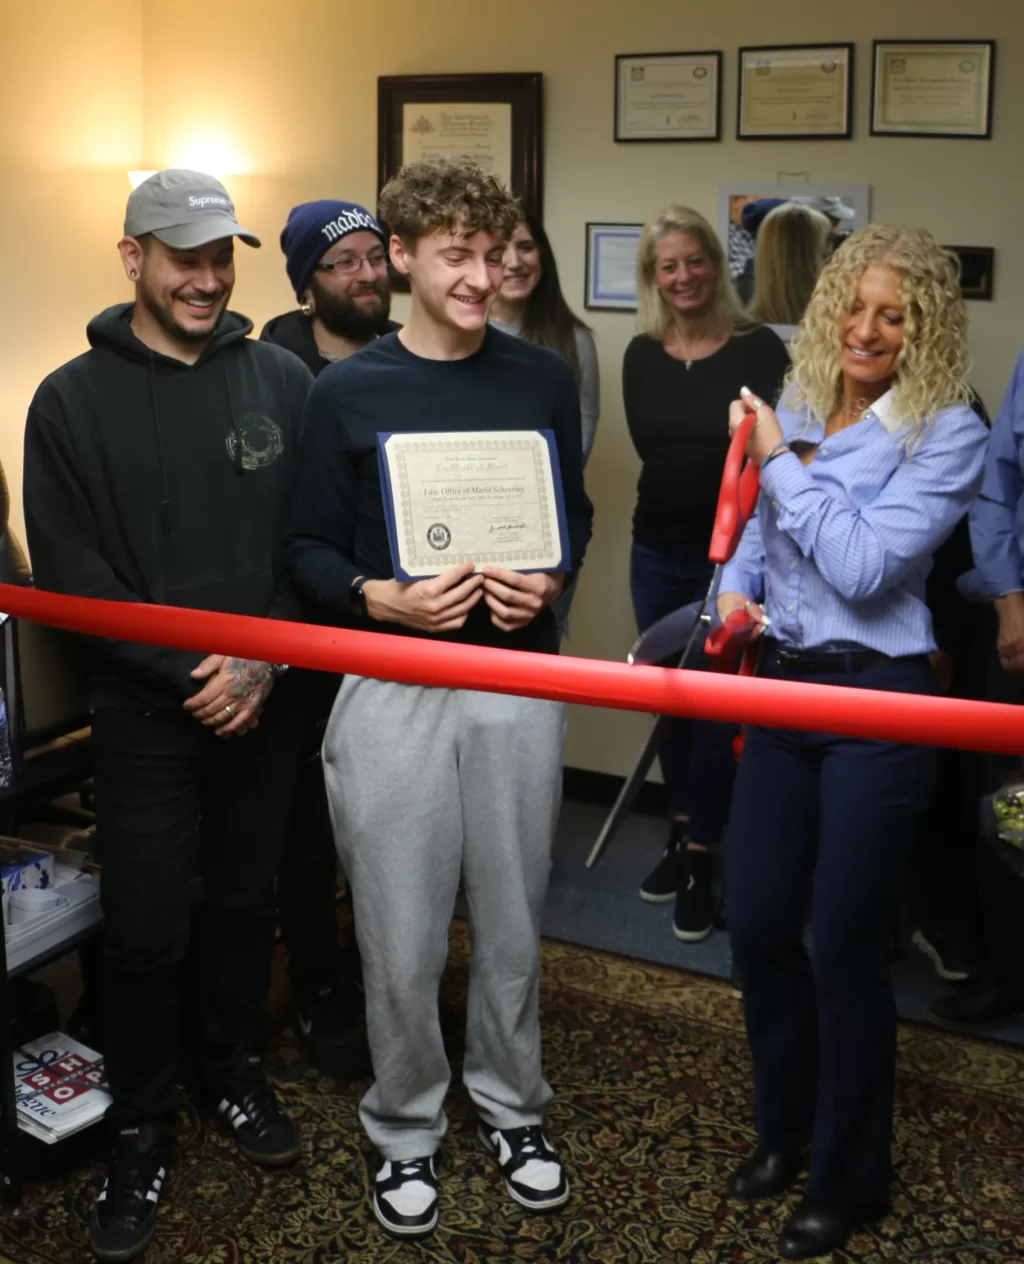 (Photo by Hank Russell) Maria Scheuring (right) prepares to cut the ribbon in celebration of her new office at 1 South Ocean Avenue, Suite 204A, in Patchogue. She is joined by Ron Ulip (left), the owner of Freshly Cut Films, and her son Maddox (center).